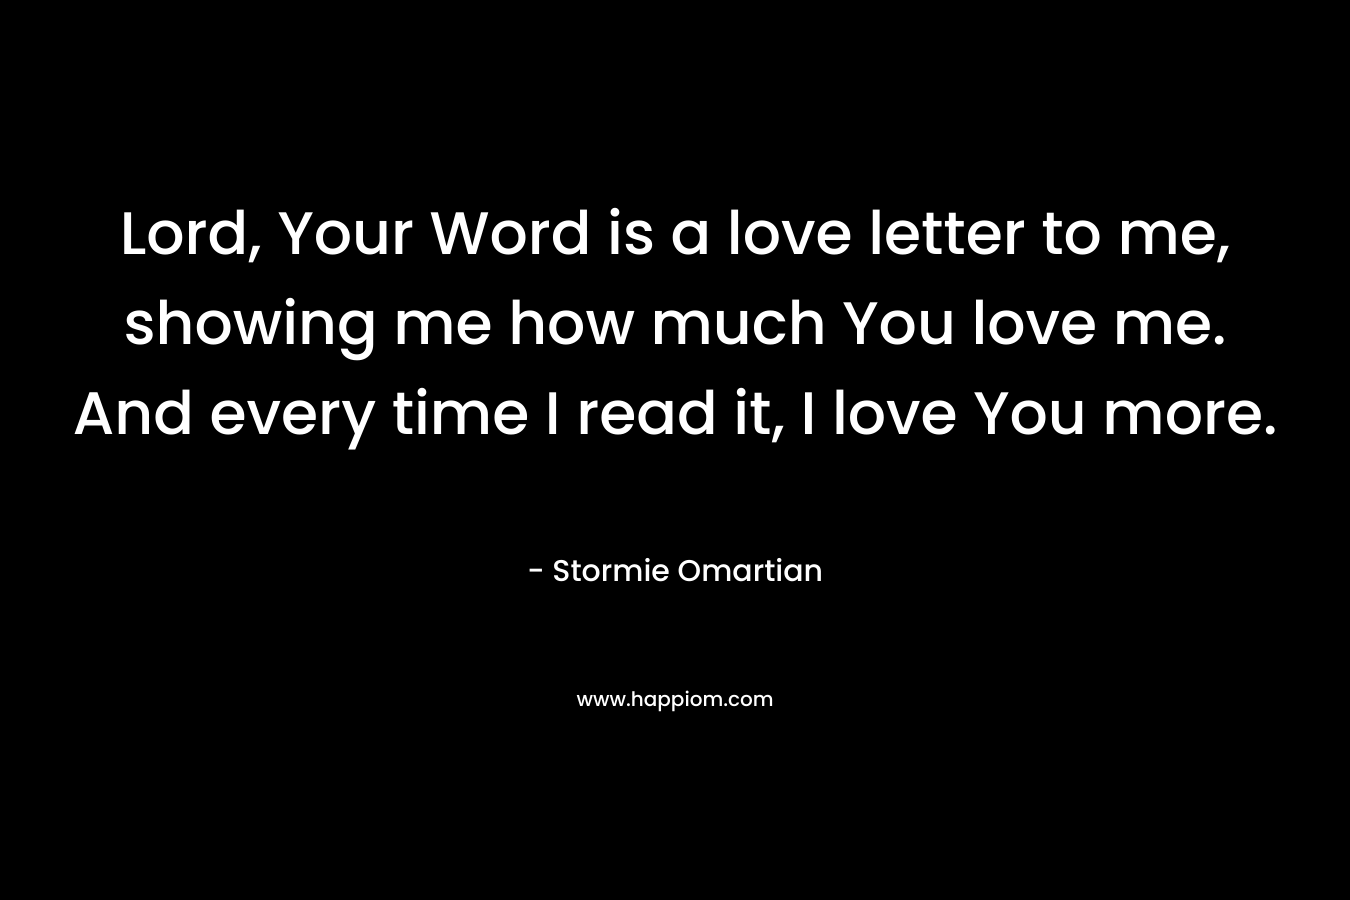 Lord, Your Word is a love letter to me, showing me how much You love me. And every time I read it, I love You more. – Stormie Omartian